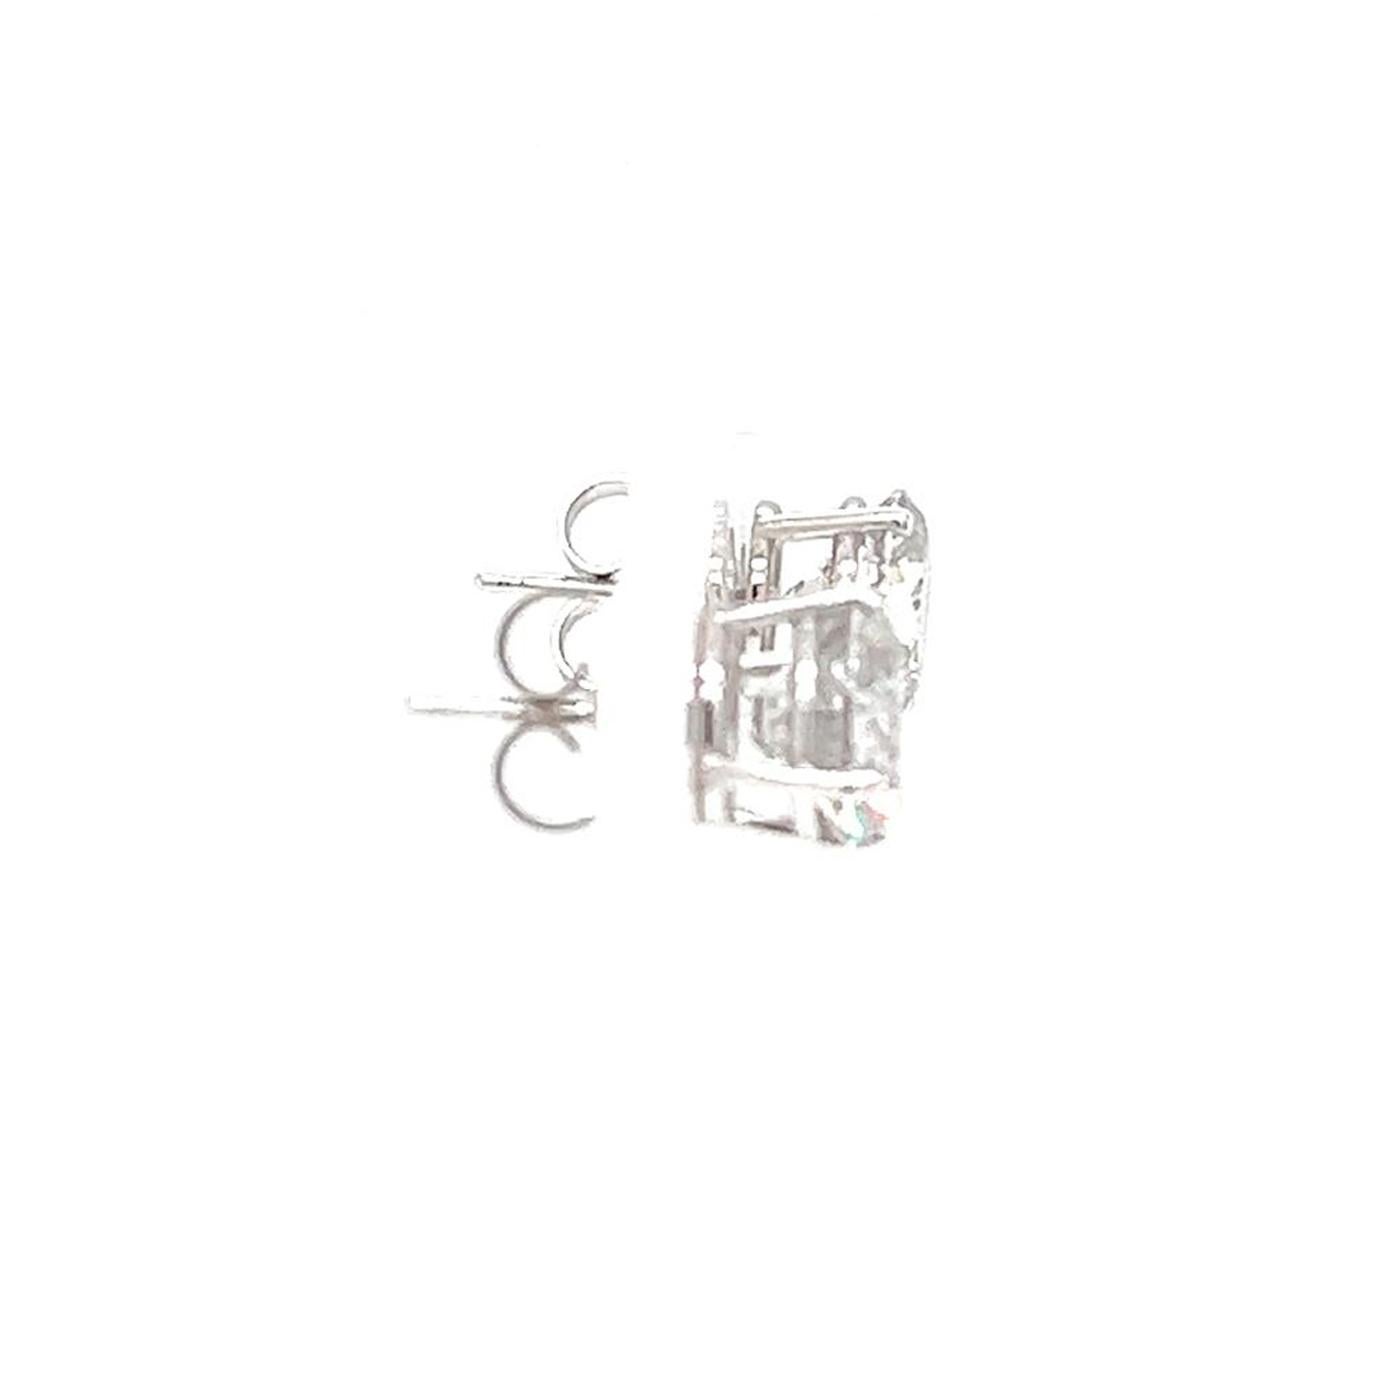 4.02ct Natural Round Diamonds Stud Earring 14K White Gold 4 Prong Basket Setting For Sale 3